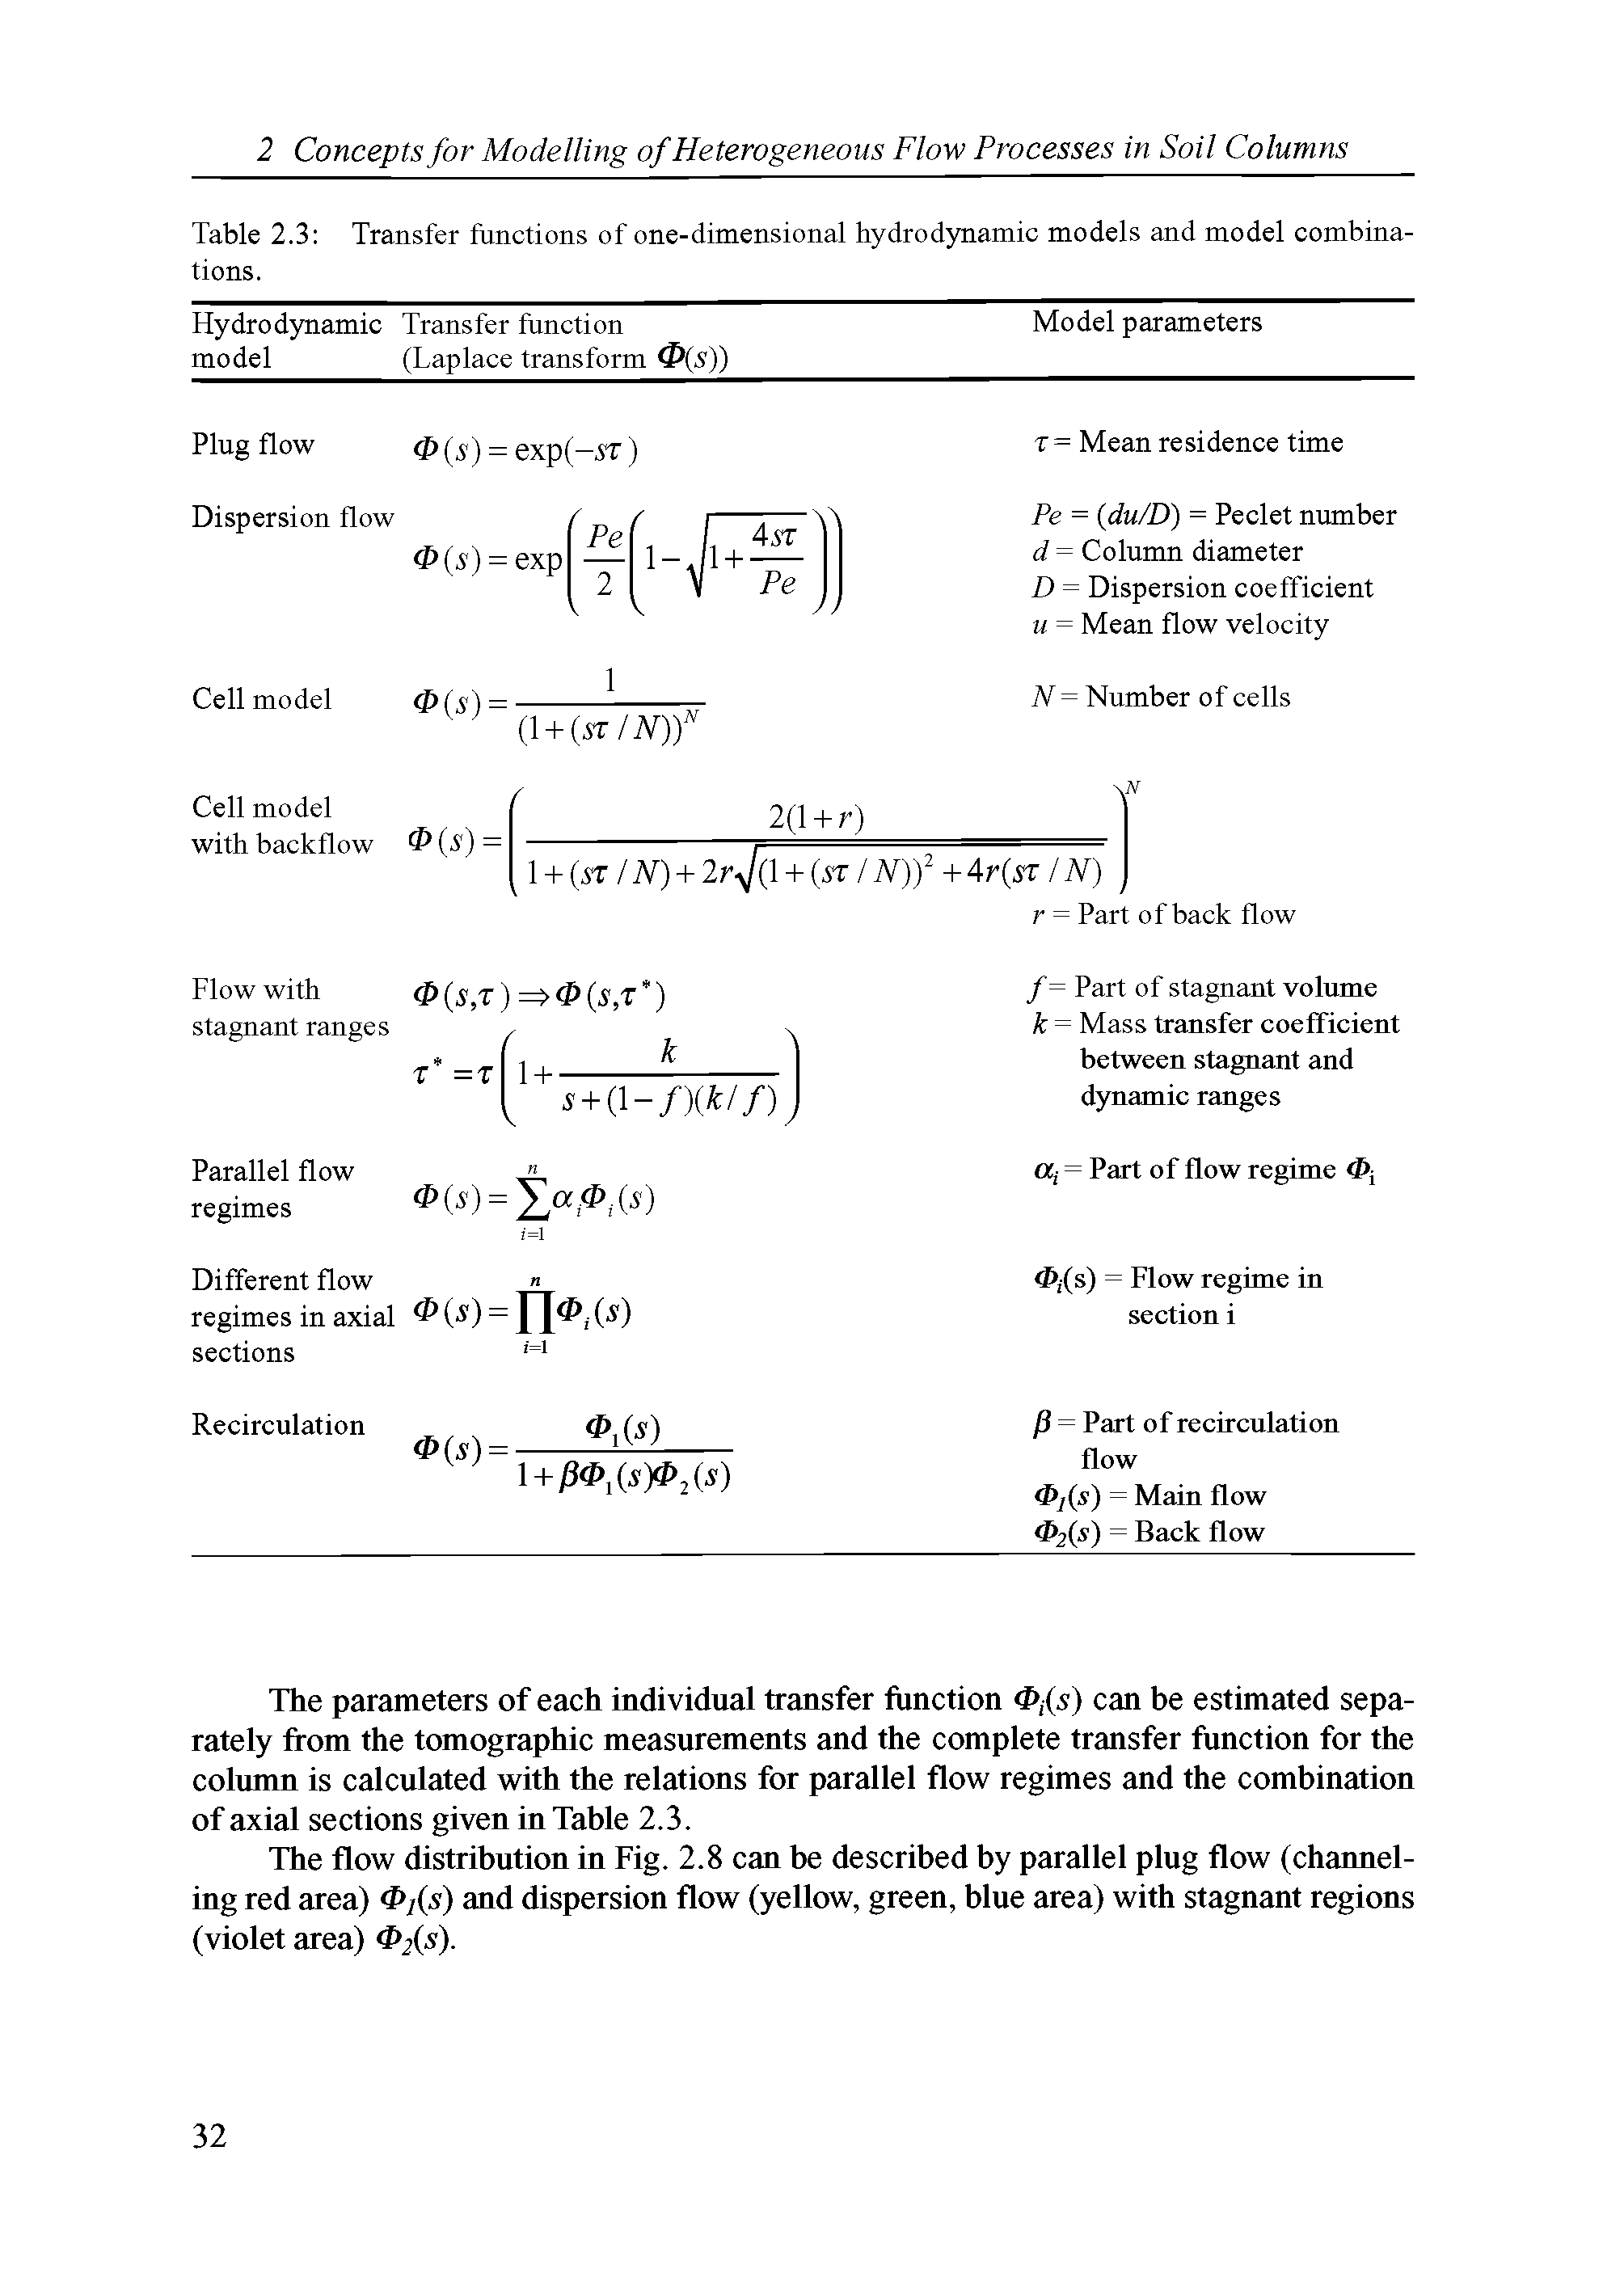 Table 2.3 Transfer functions of one-dimensional hydrodynamic models and model combinations.